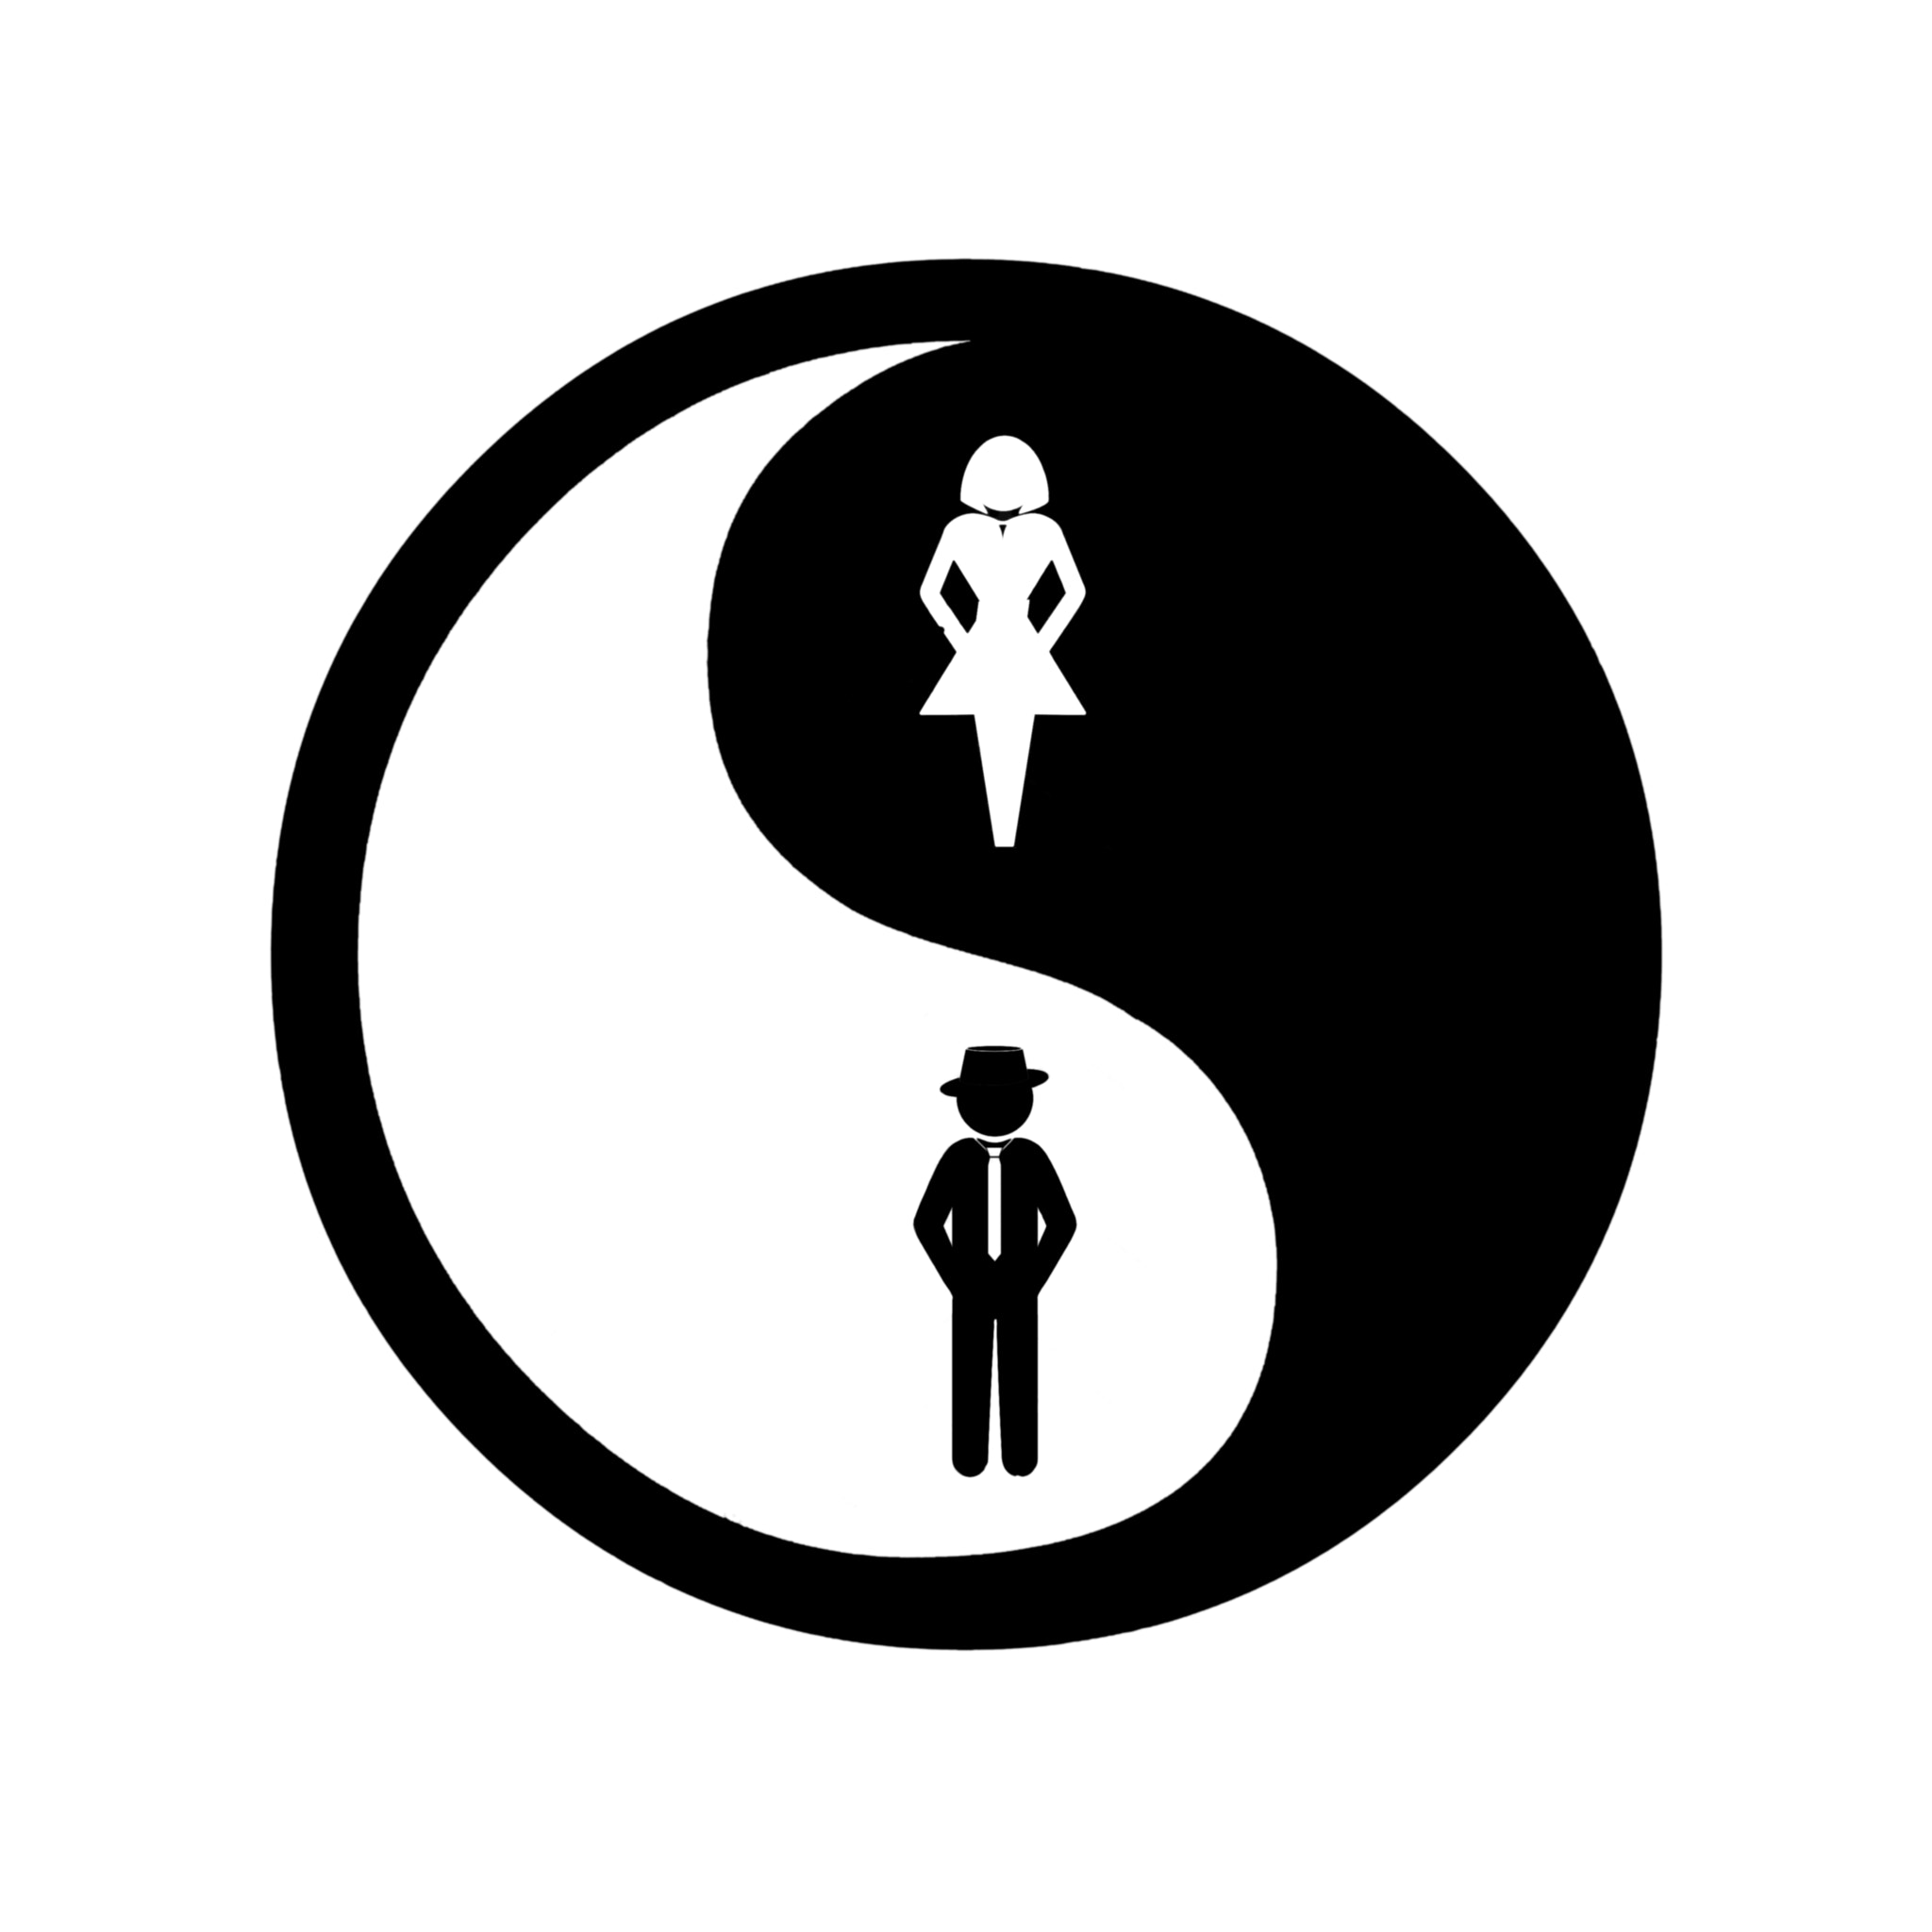 Equality of woman and man